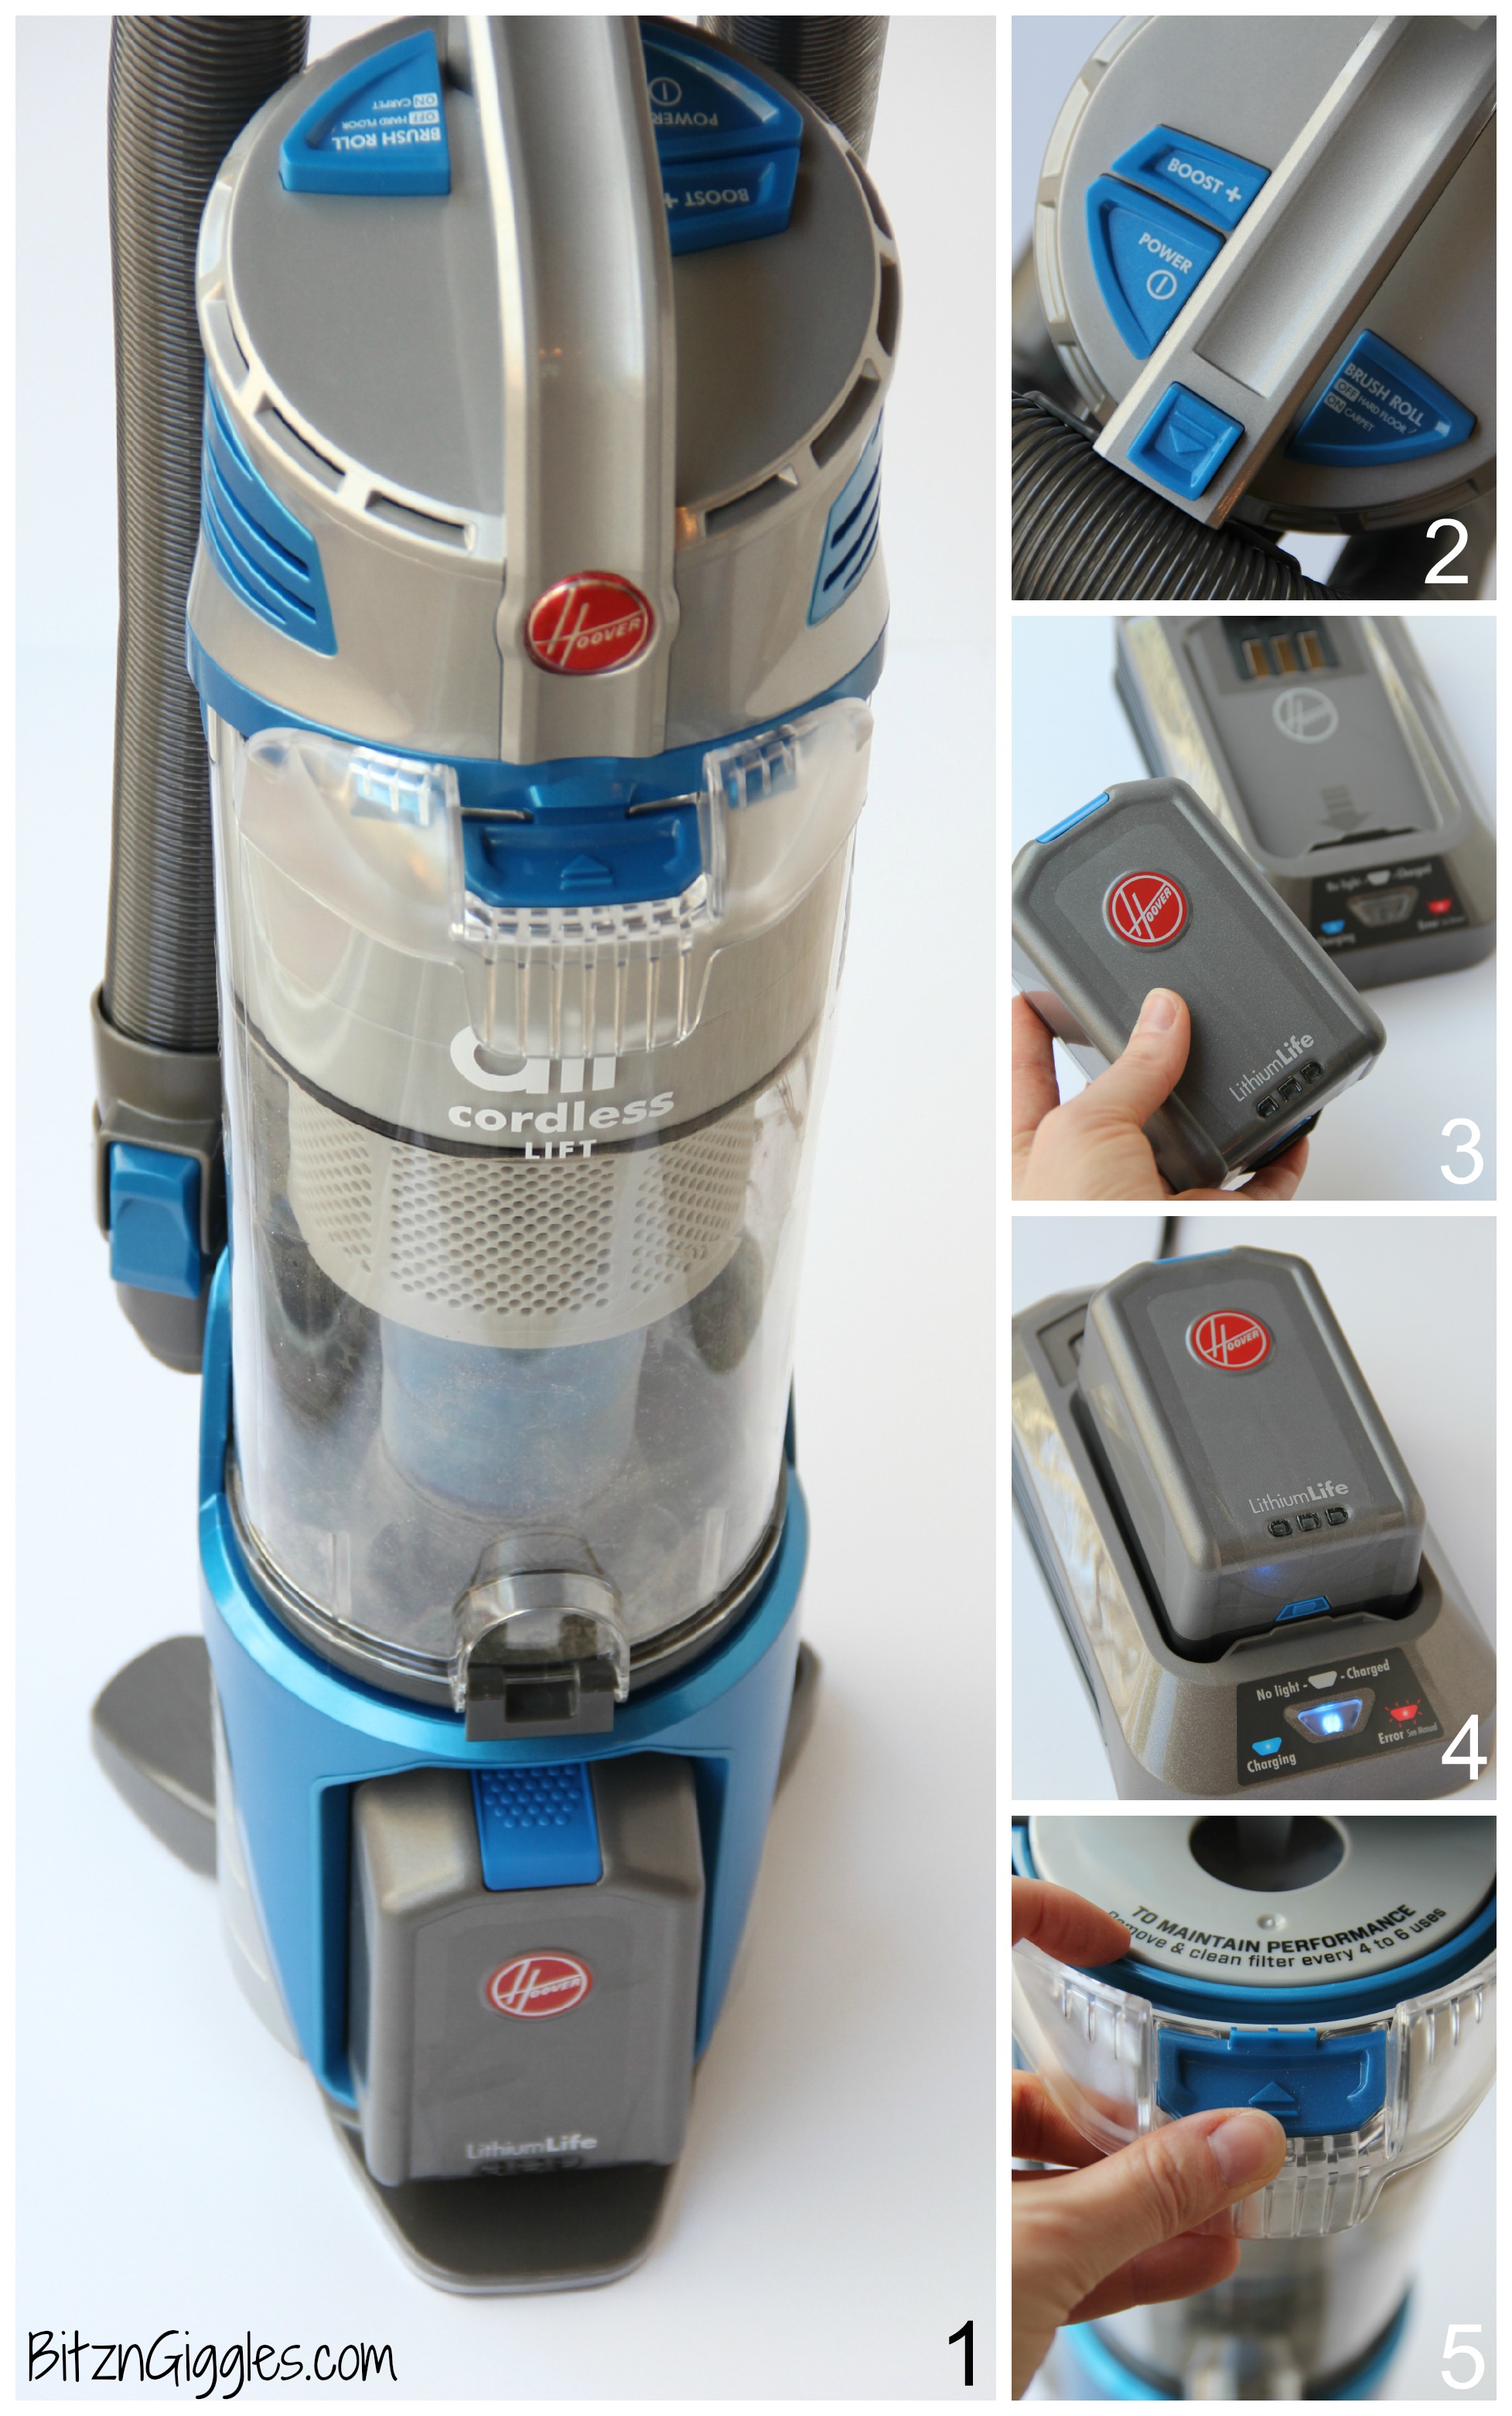 5 Reasons Why I Cut the Cord On My Vacuum - Abandoning my old vacuum for a Hoover cordless vacuum has changed the way I clean! It saves me time and headaches! Come on over and check it out!